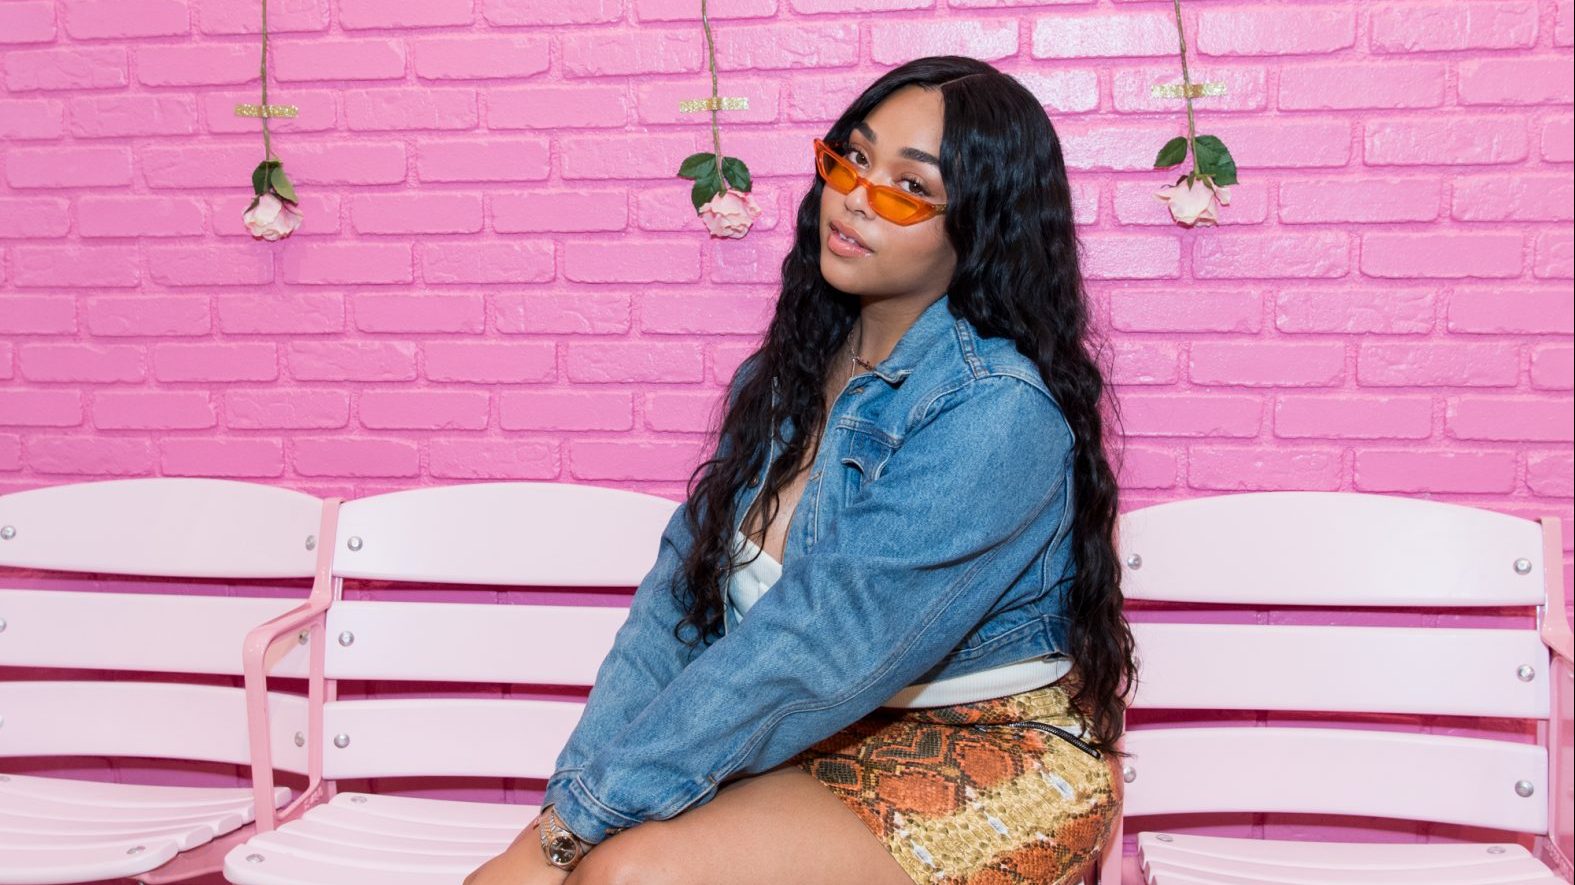 Jordyn Woods' 30 Pound Weight Loss After Tristan Thompson Scandal